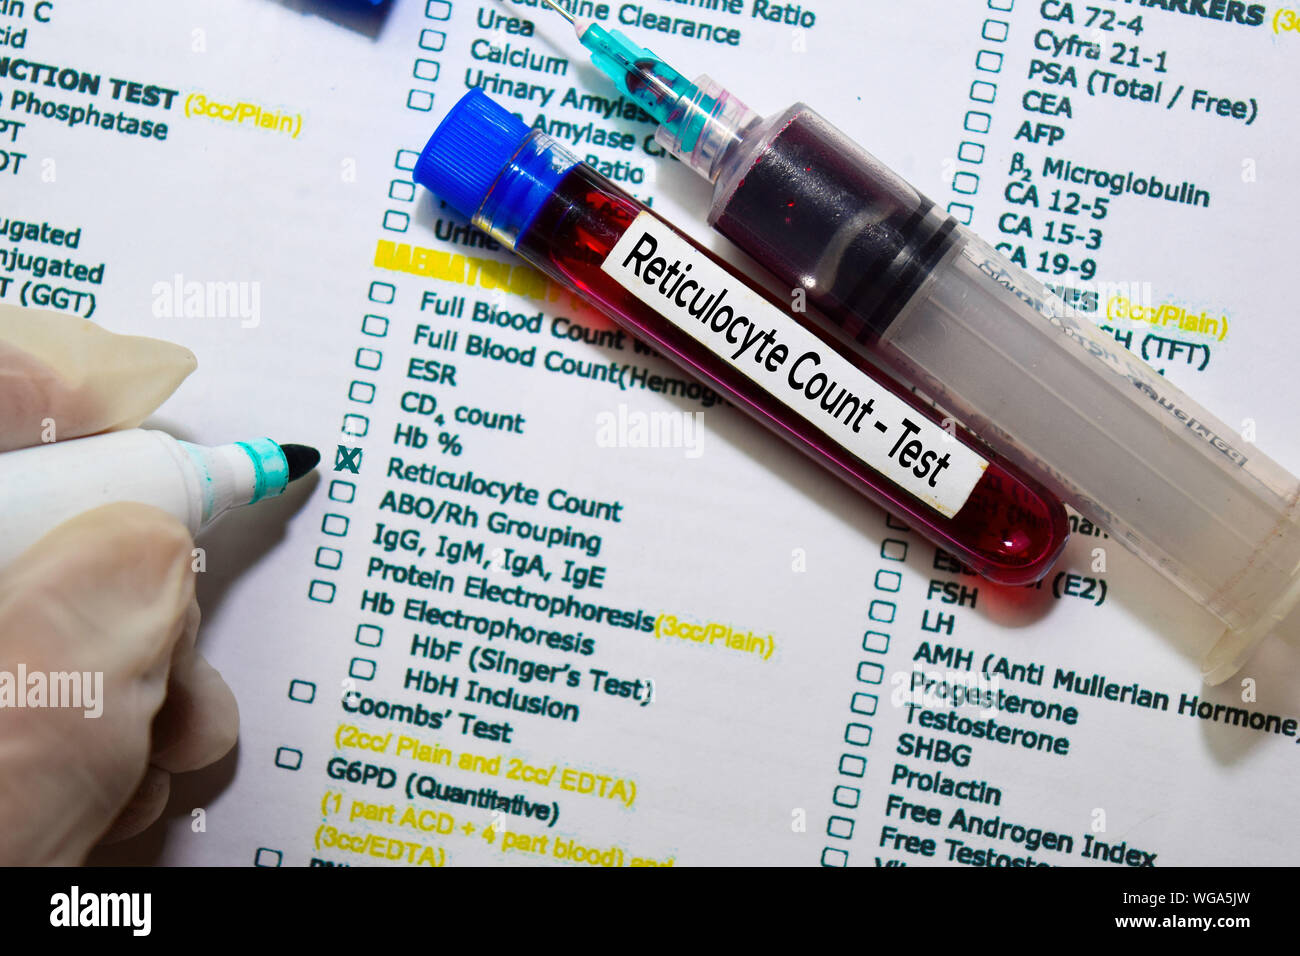 Reticulocyte Count - Test with blood sample. Top view isolated on office desk. Healthcare/Medical concept Stock Photo